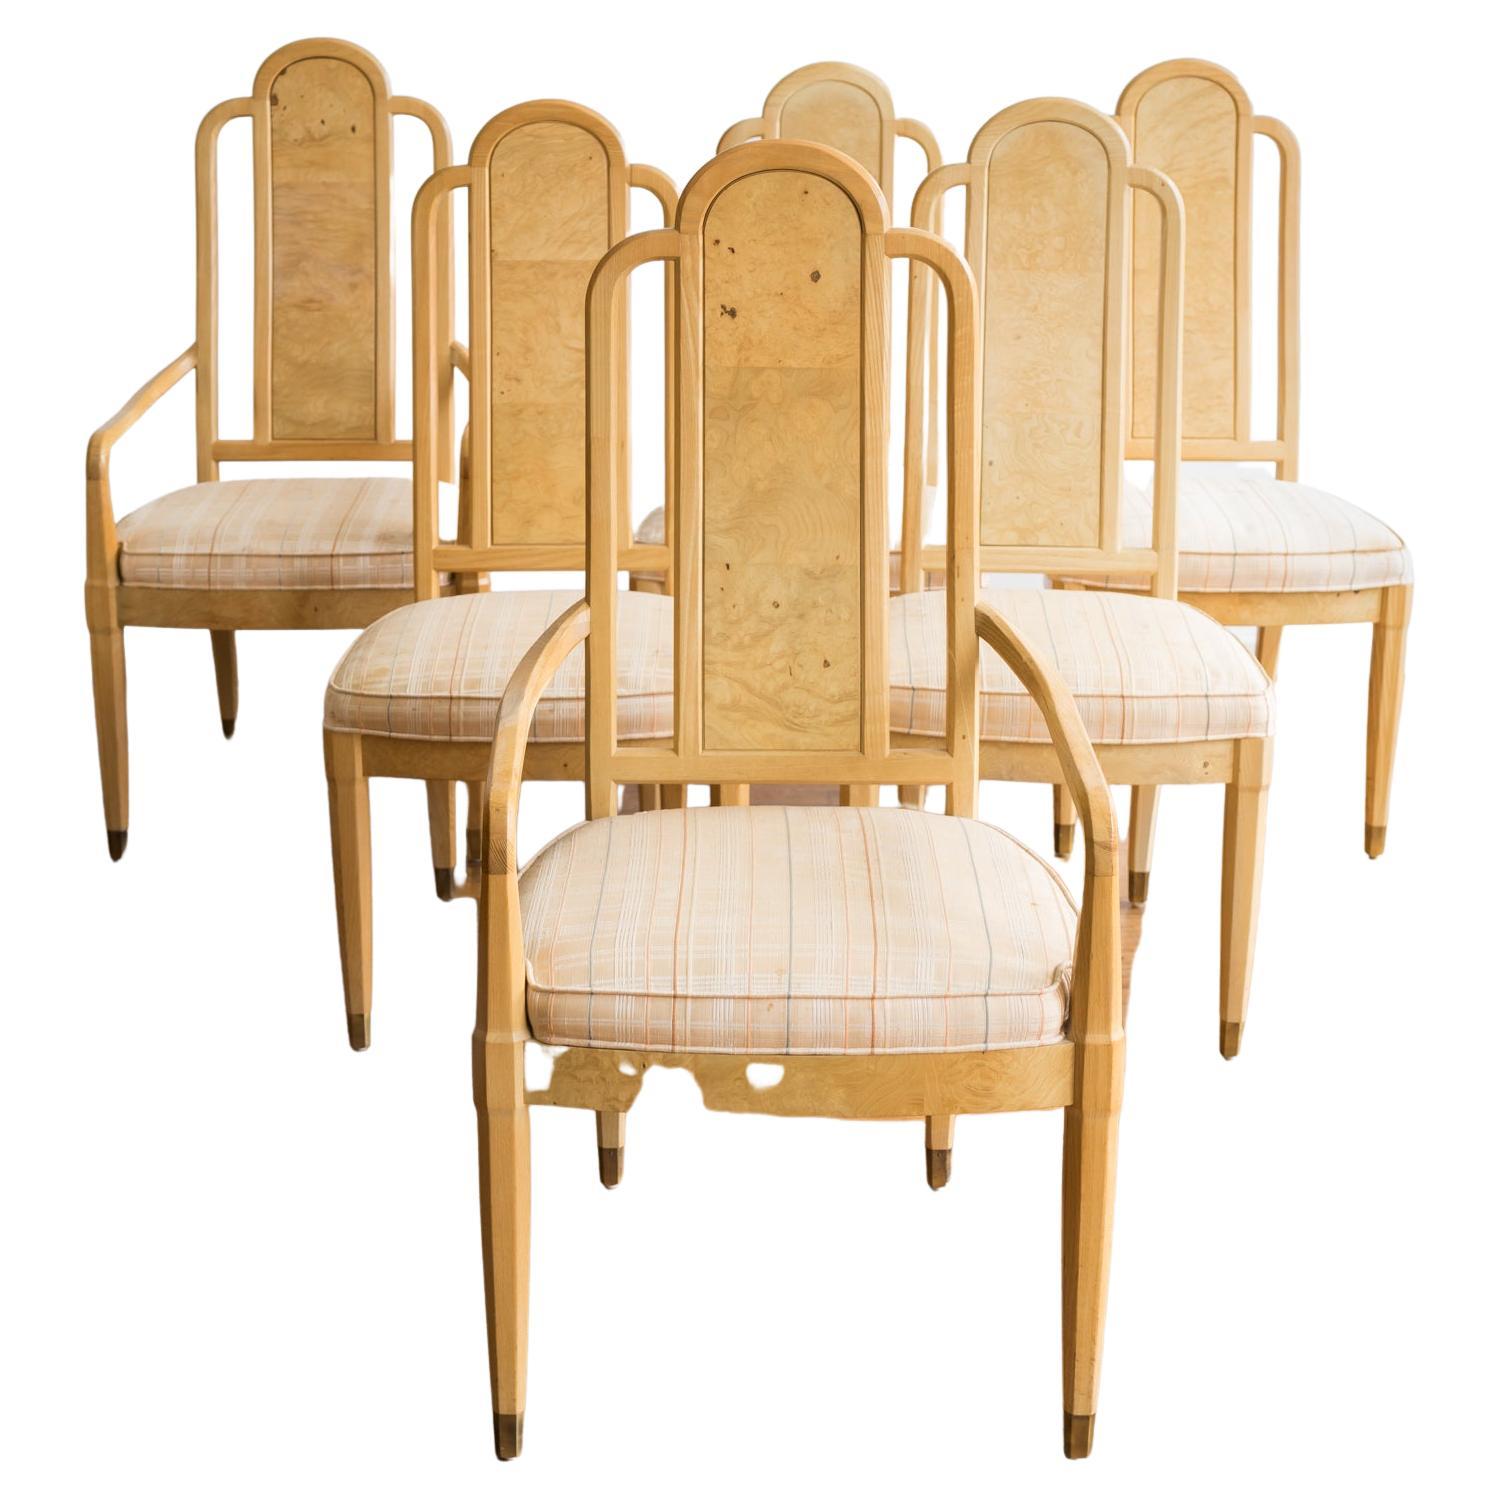 Measures: 19” x 22” 42.5H, seat height 18; arm height 24.

Stunning set of 6 splat-back dining chairs from Henredon's Scene Two line. This line marked a departure from Henredon's typical ornate designs in dark wood and introduced a lighter, more